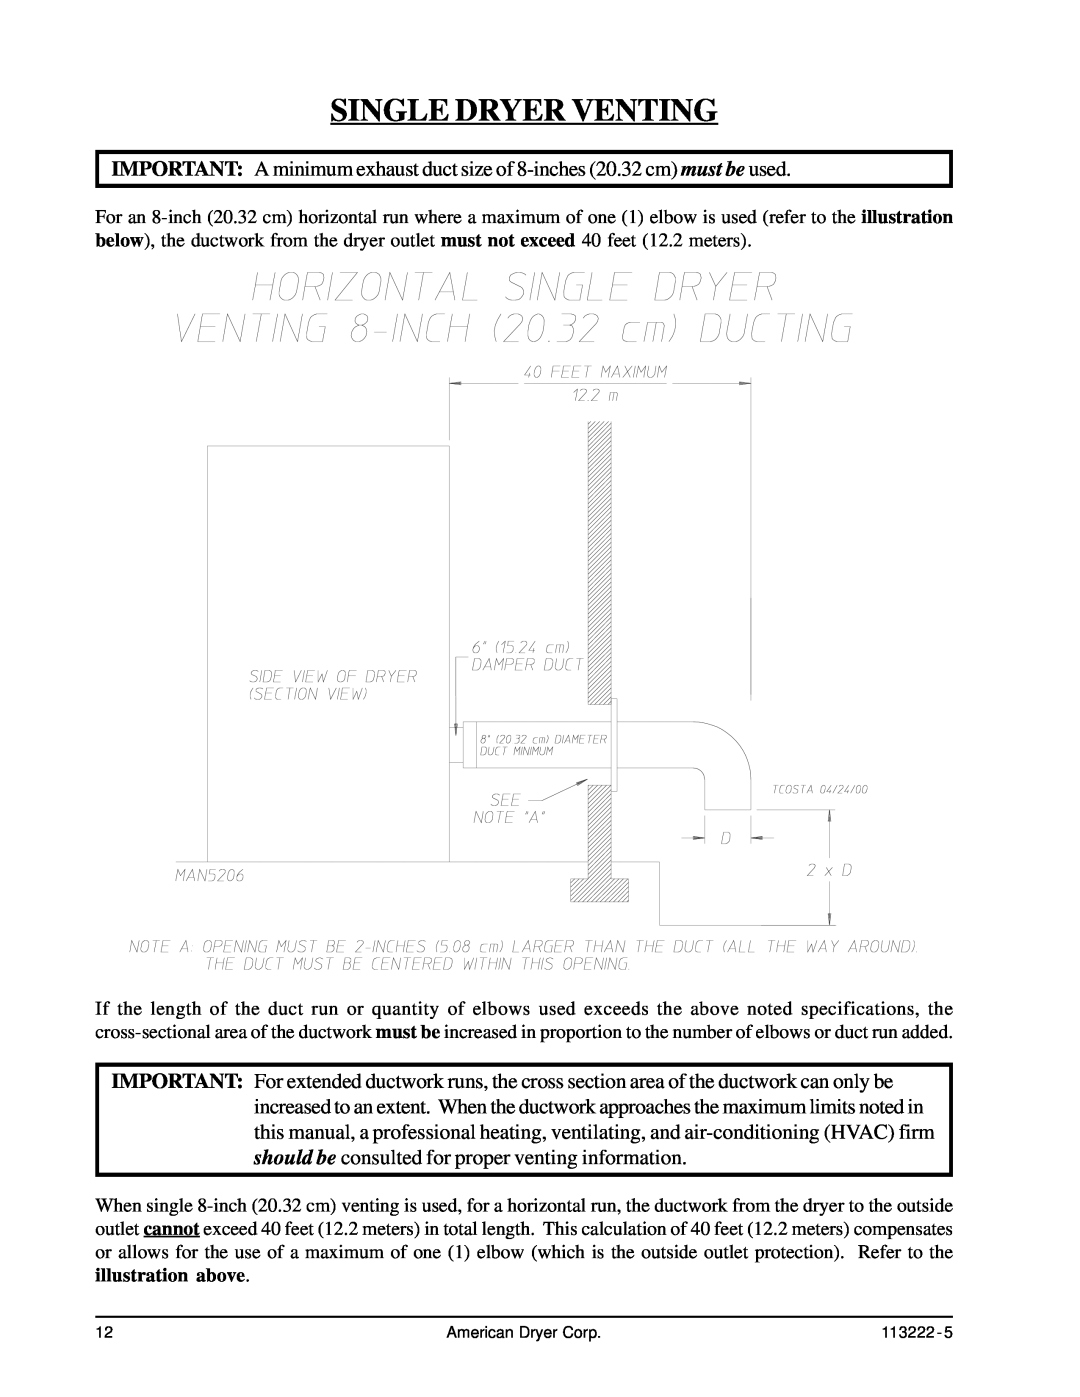 American Dryer Corp AD-24 Phase 7 installation manual Single Dryer Venting 